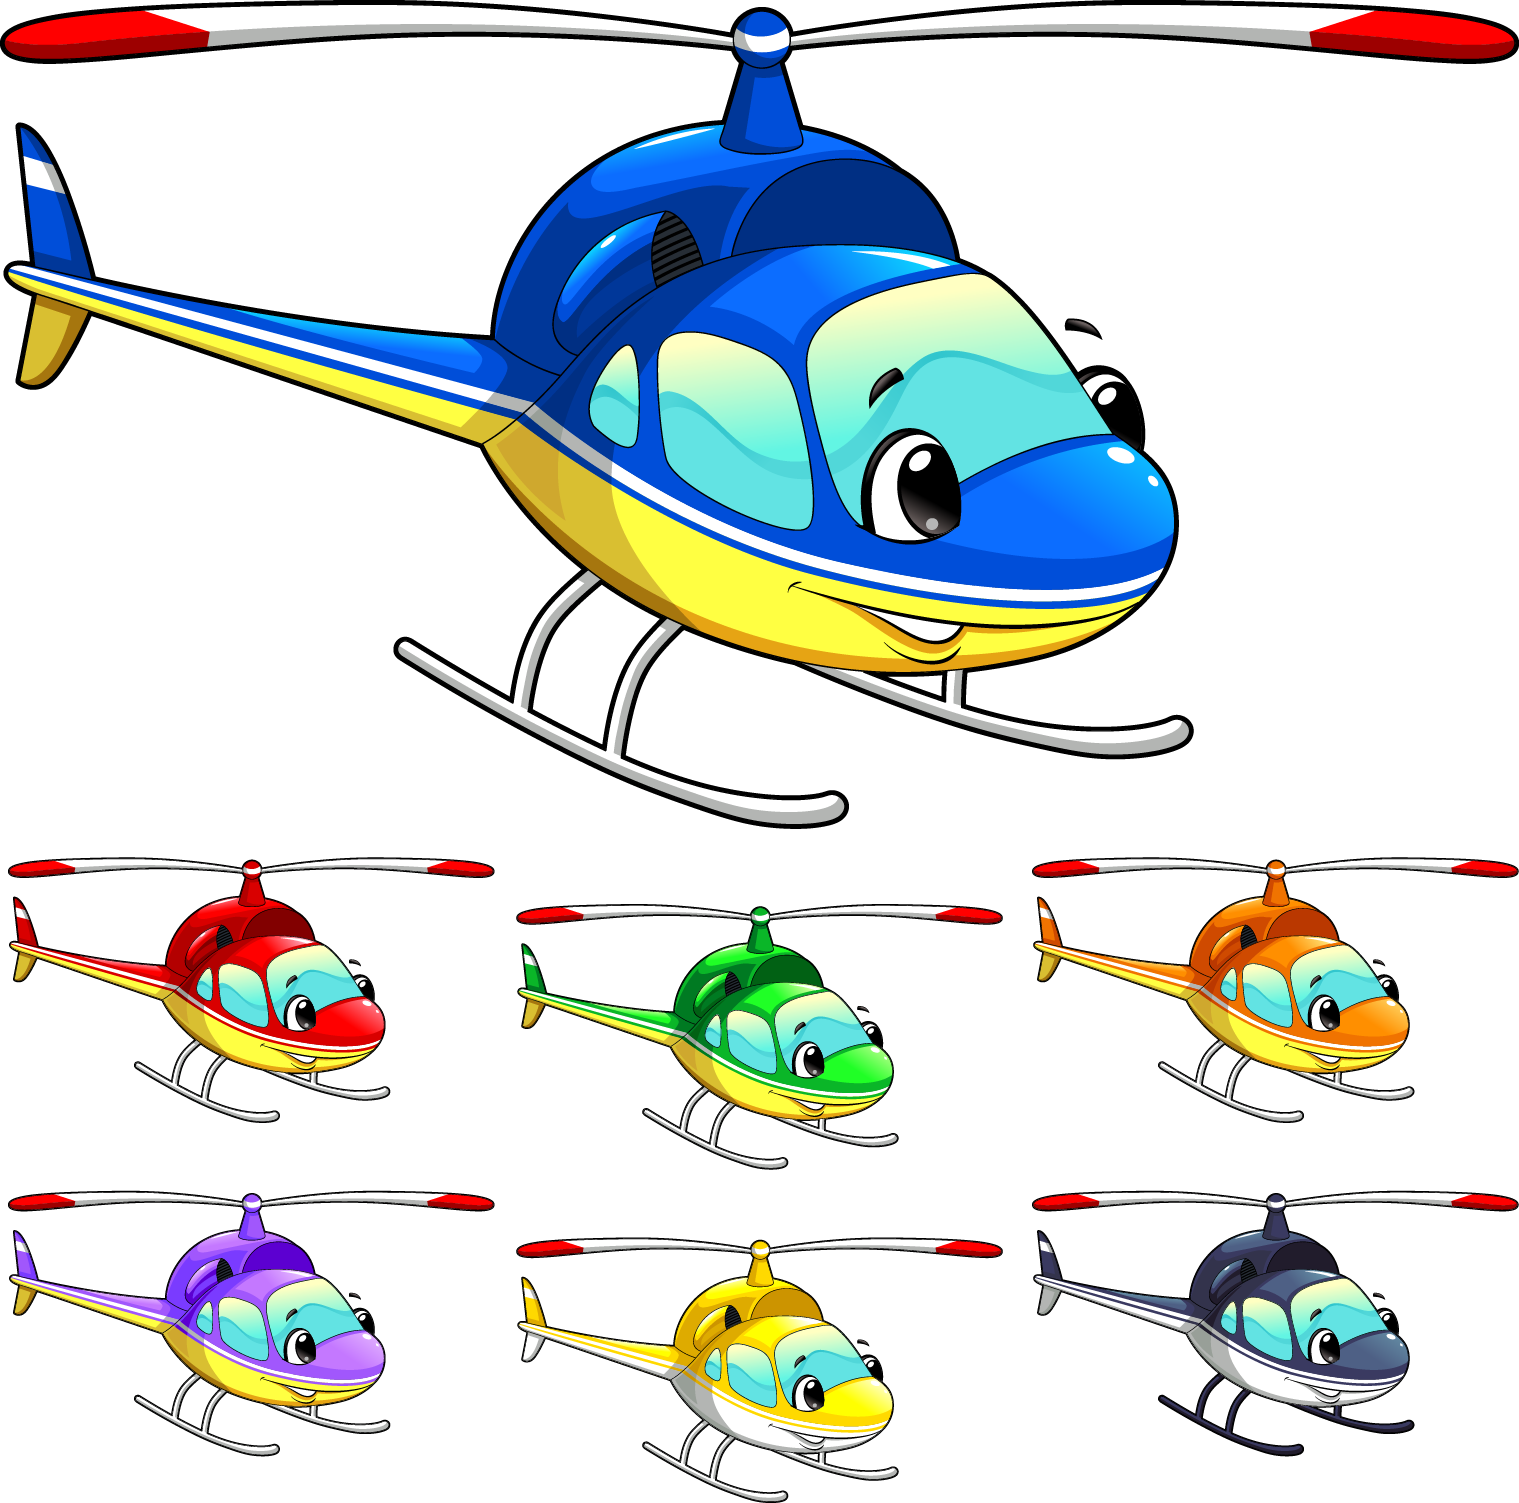 Helicopter Airplane Aircraft Cartoon - Helicopter Airplane Aircraft Cartoon (1519x1503)